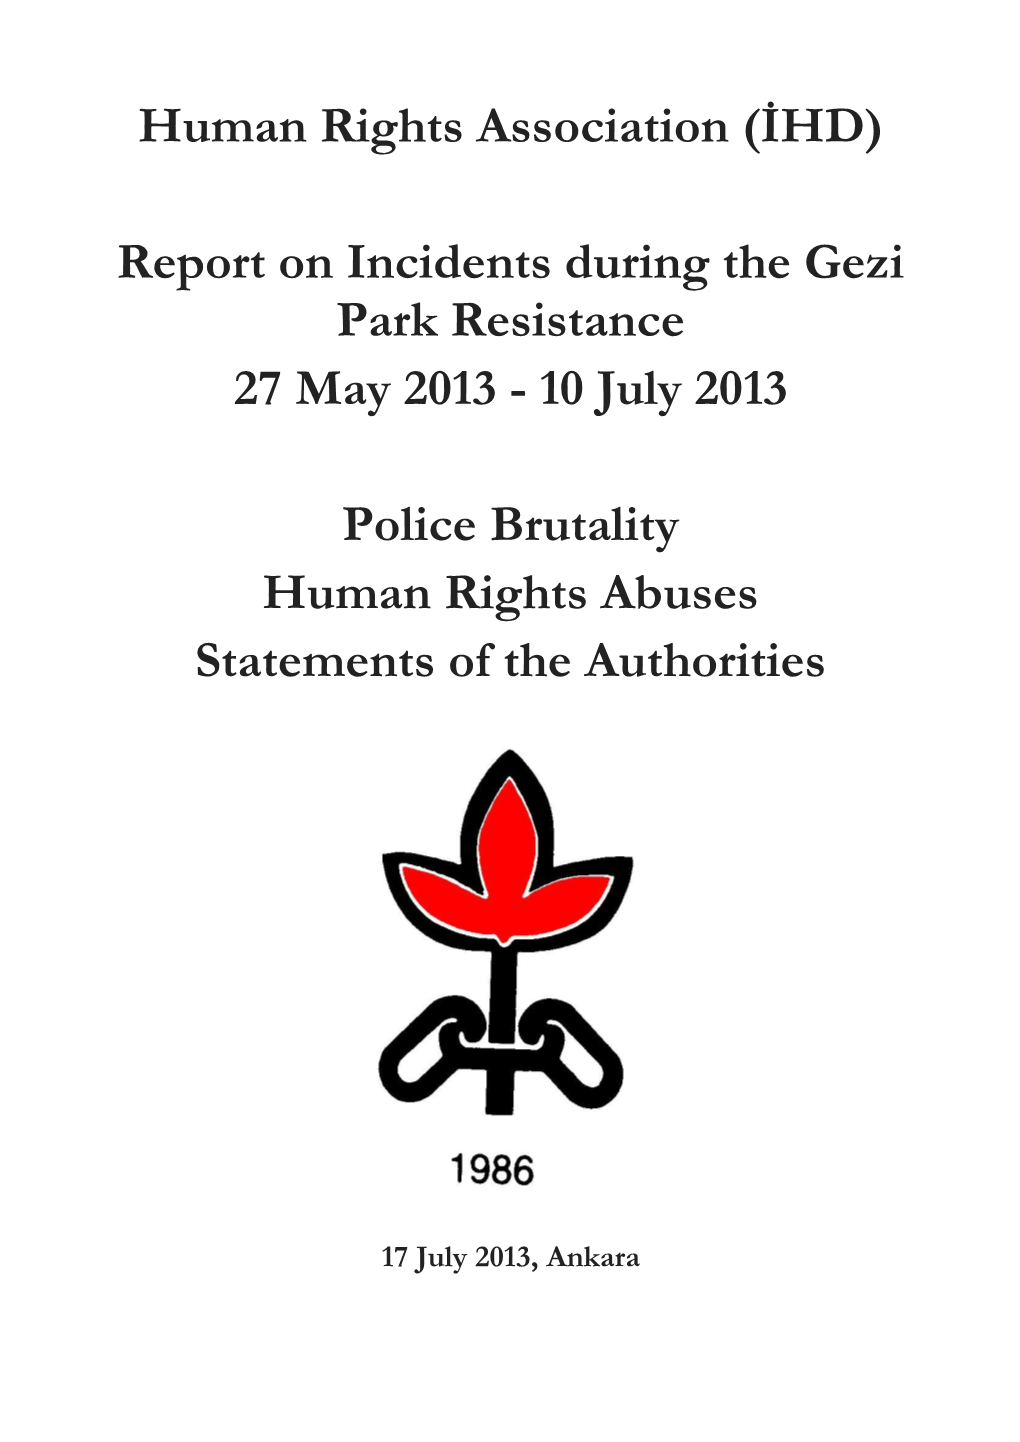 Human Rights Association (İHD) Report on Incidents During the Gezi